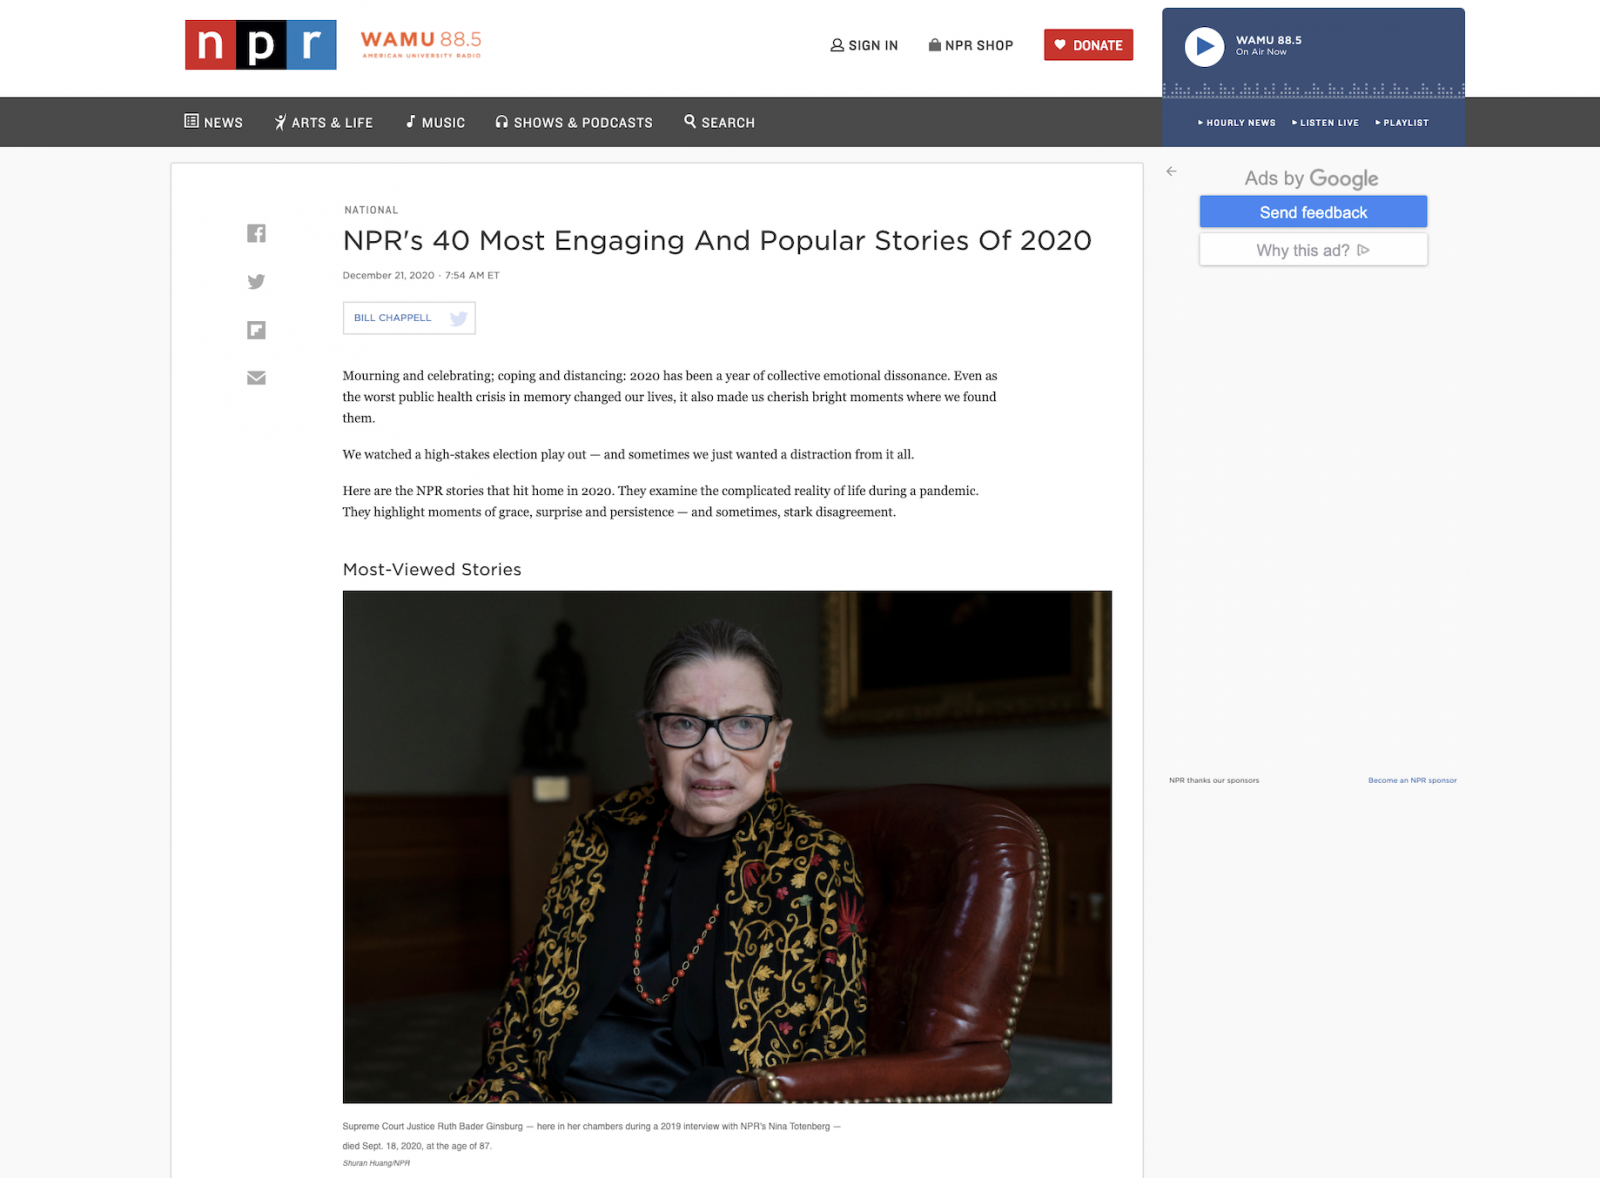 Thumbnail of Supreme Court Justice Ruth Bader_ept. 18, 2020, at the age of 87.